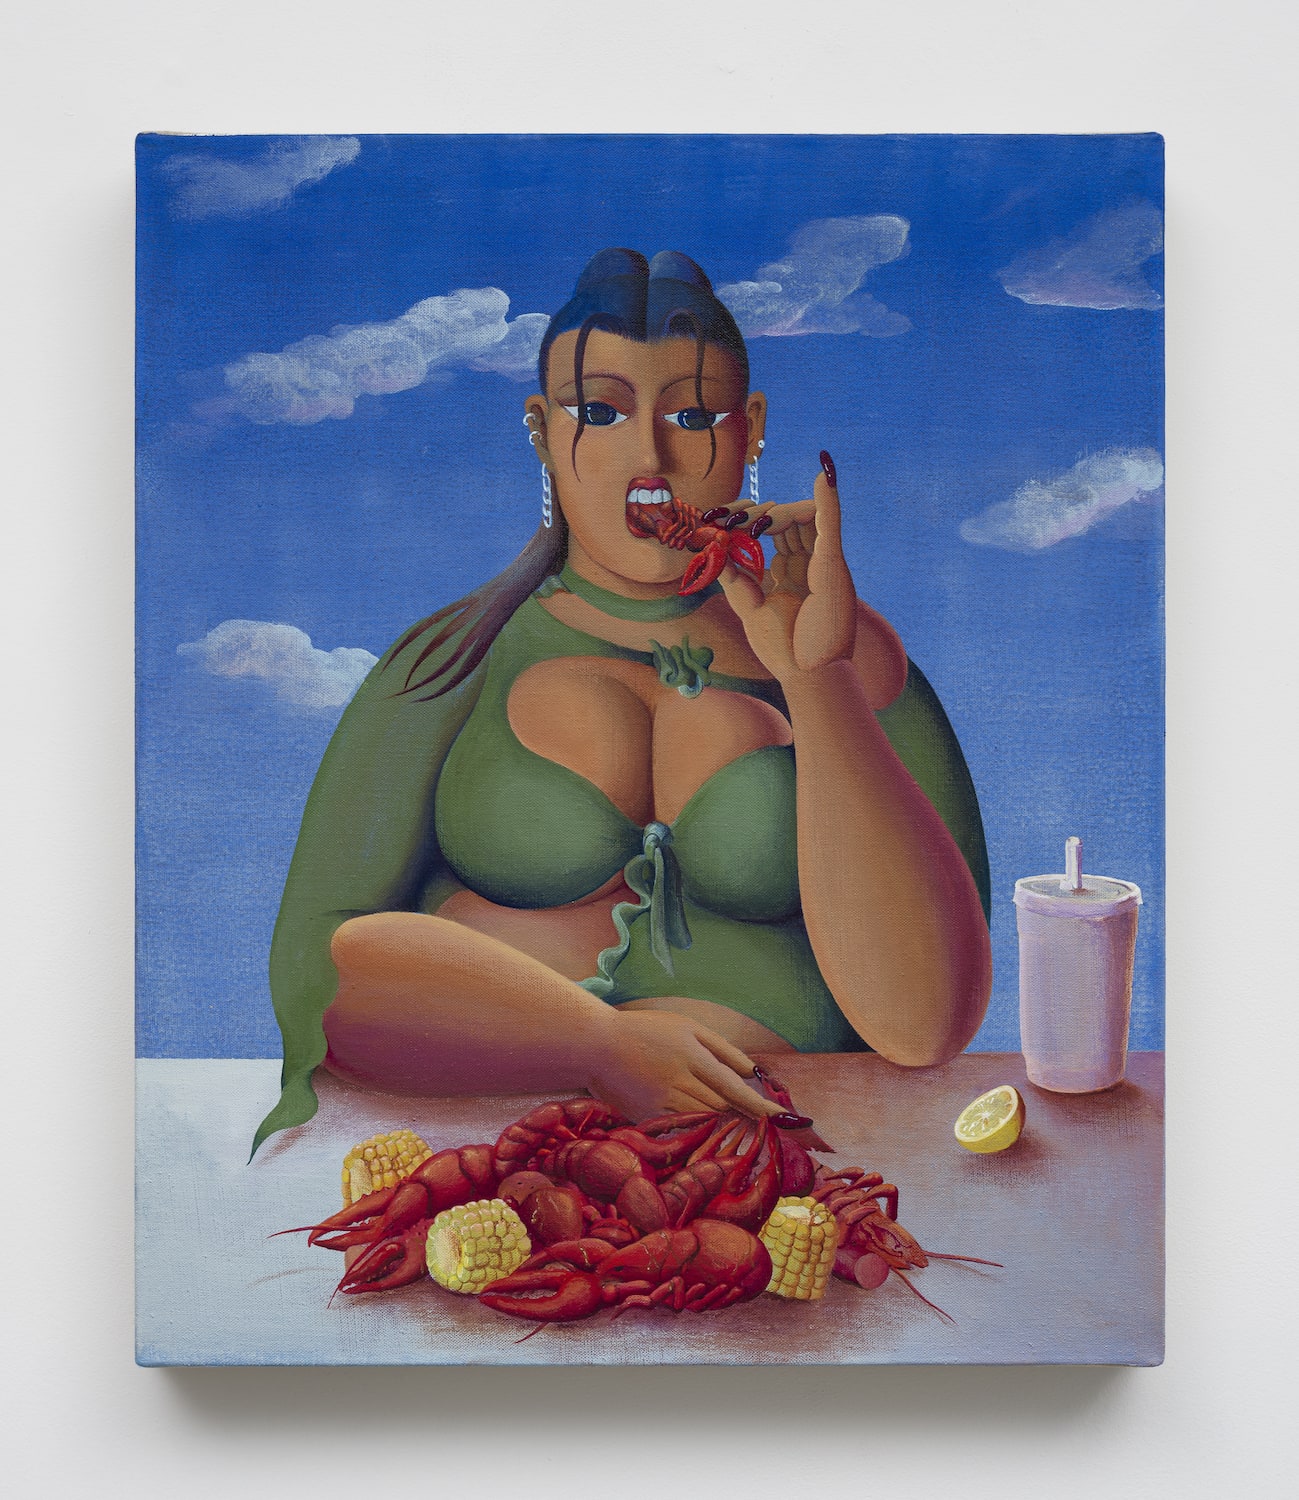 Jonny Negron, Muckbang, 2021. Acrylic on linen. 24 x 20 x 2 in.  Courtesy of the artist and Château Shatto, Los Angeles.